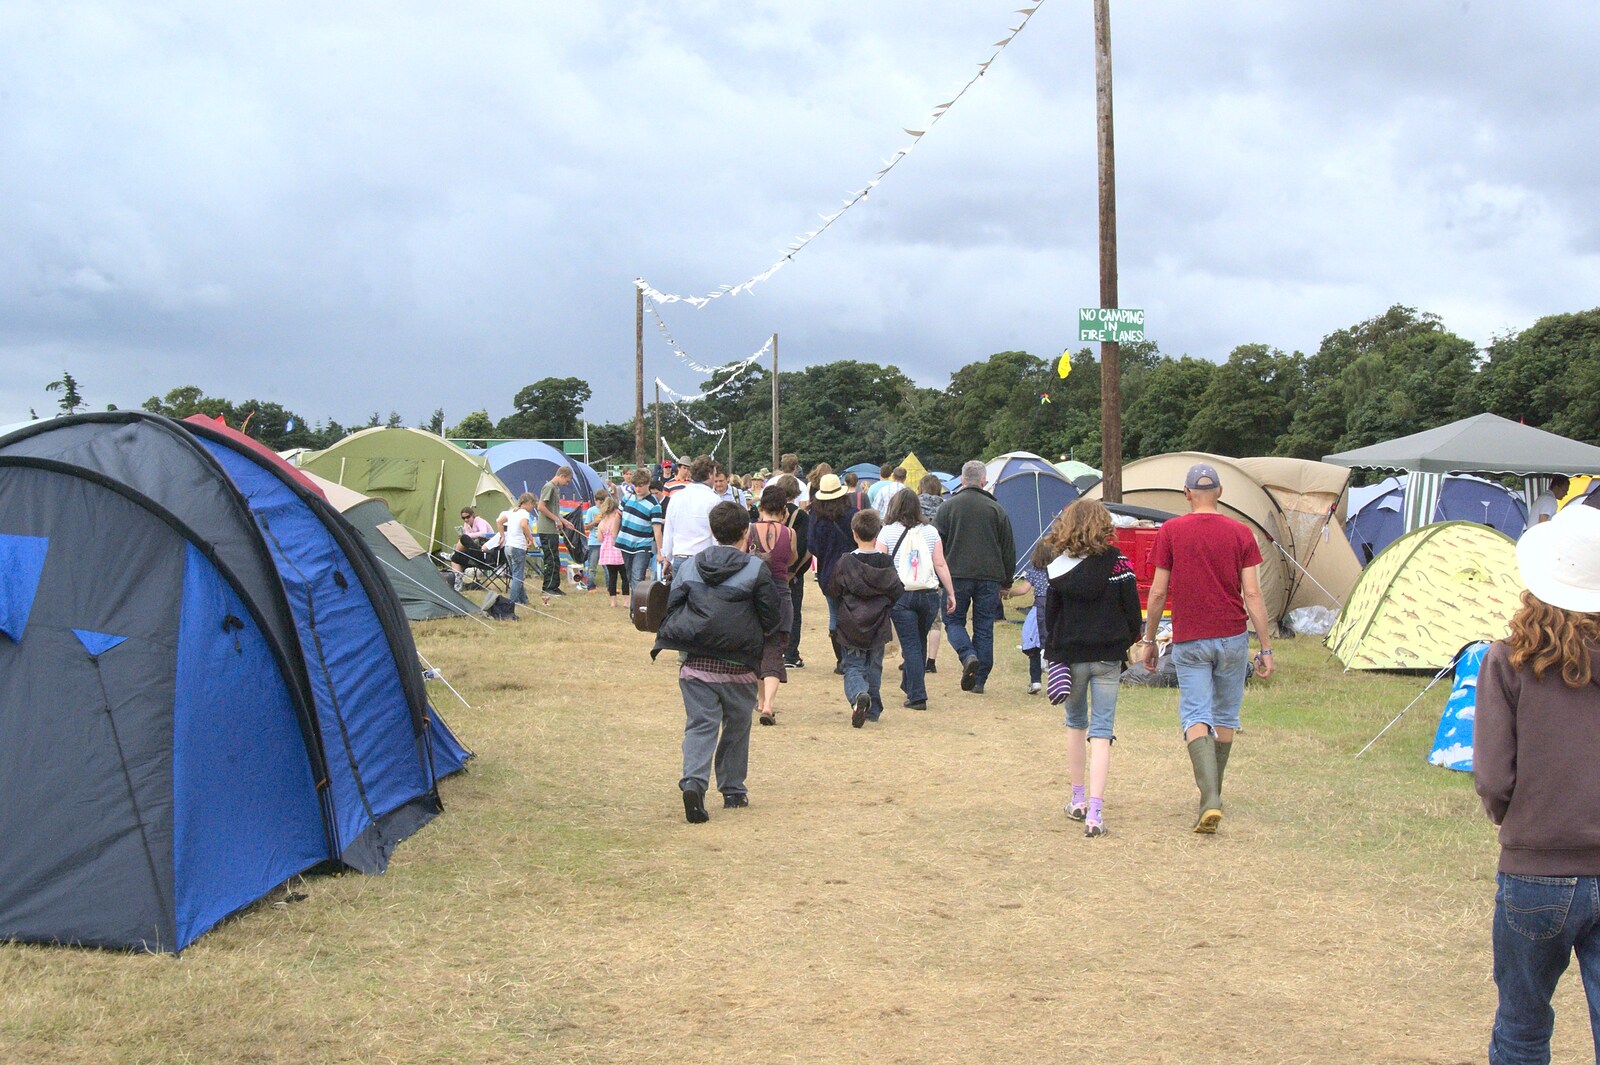 The crowds head off to the arena from The Latitude Festival, Henham Park, Suffolk - 20th July 2009